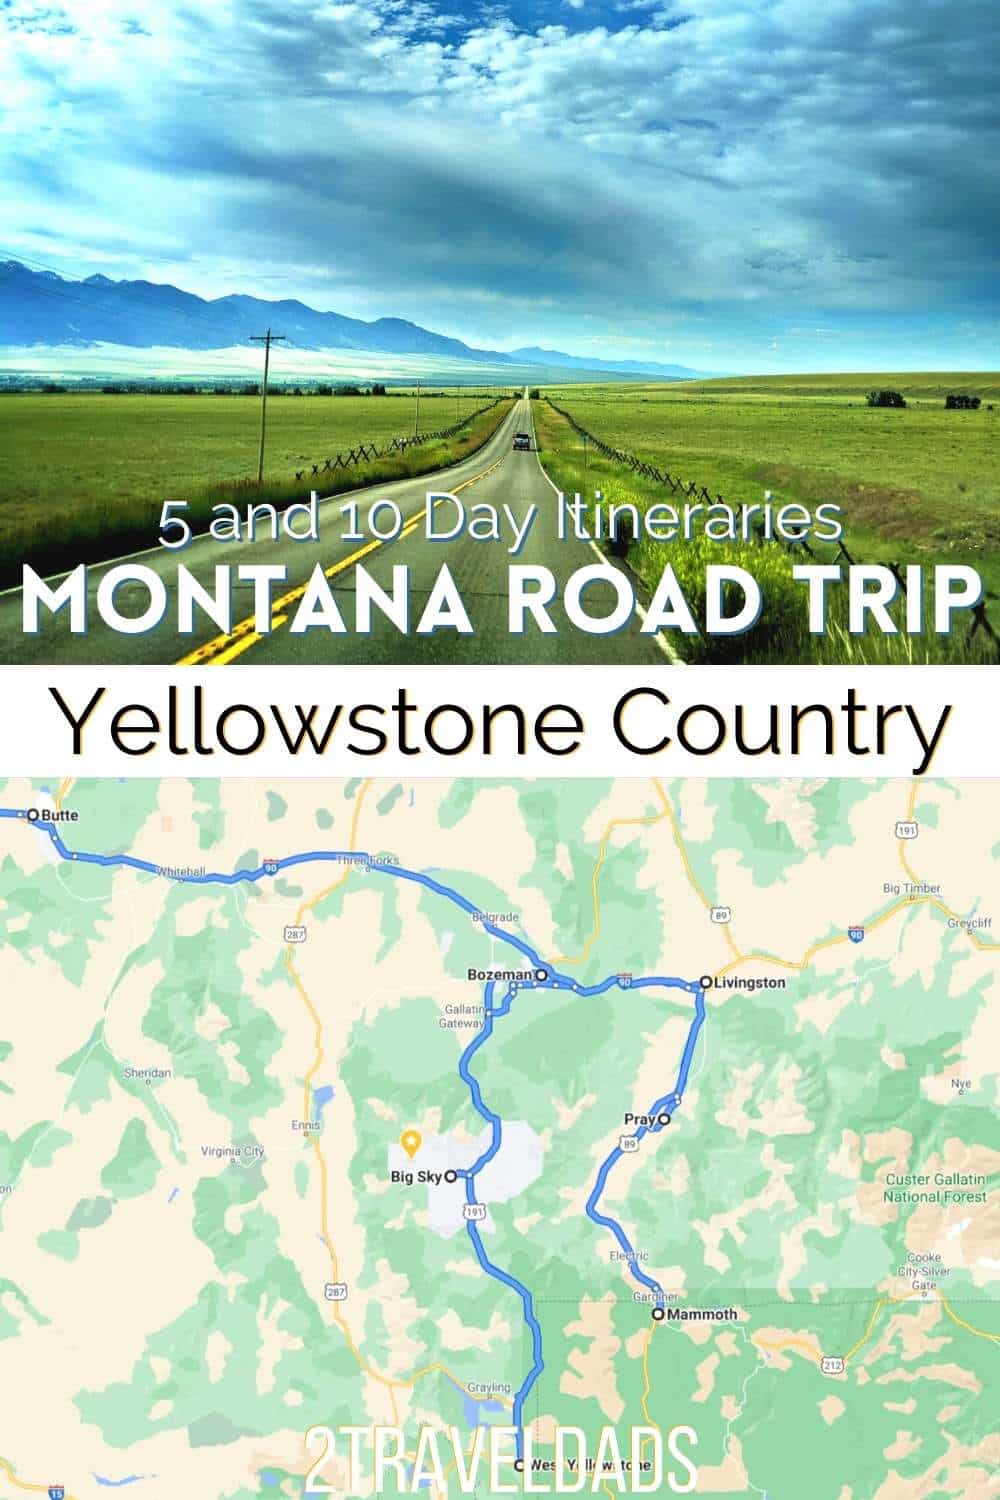 Montana road trip itinerary for 5 or 10 days of western towns and Yellowstone country. This adventure road trip includes national parks, antique stops, and Montana attractions.